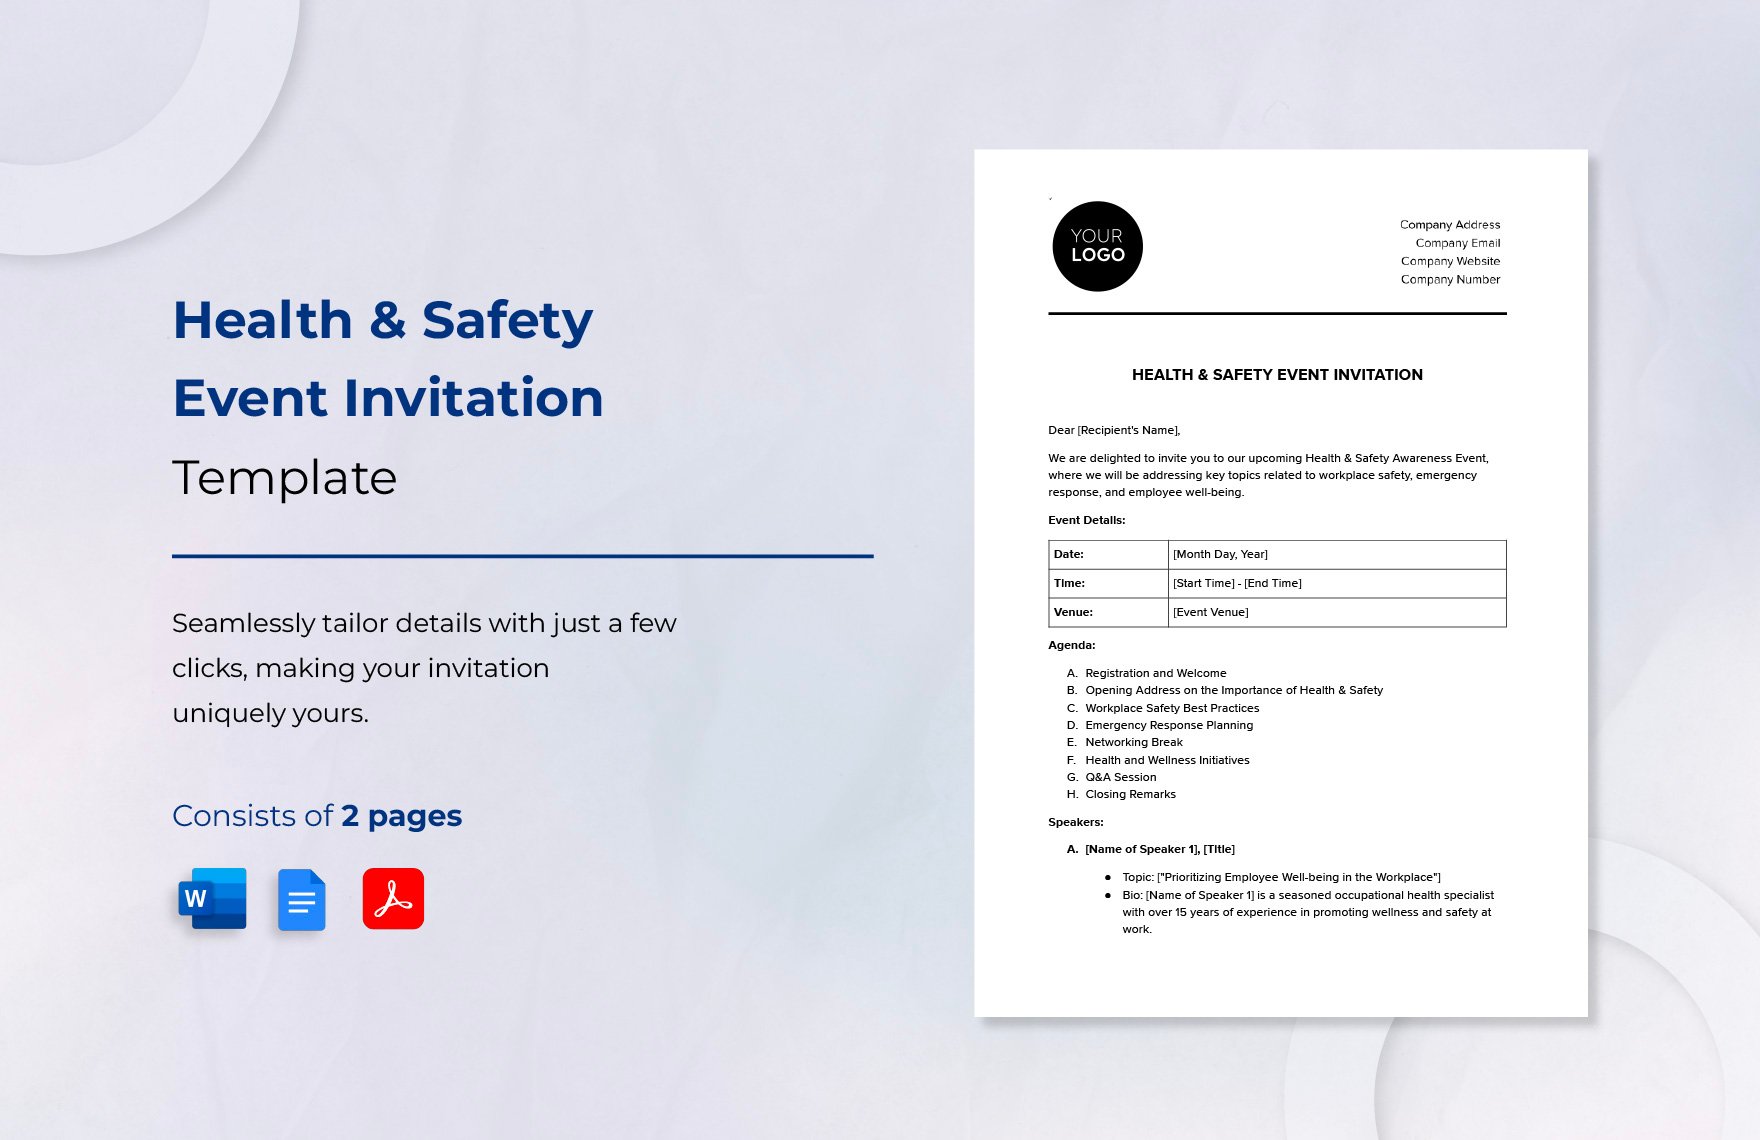 Health & Safety Event Invitation Template